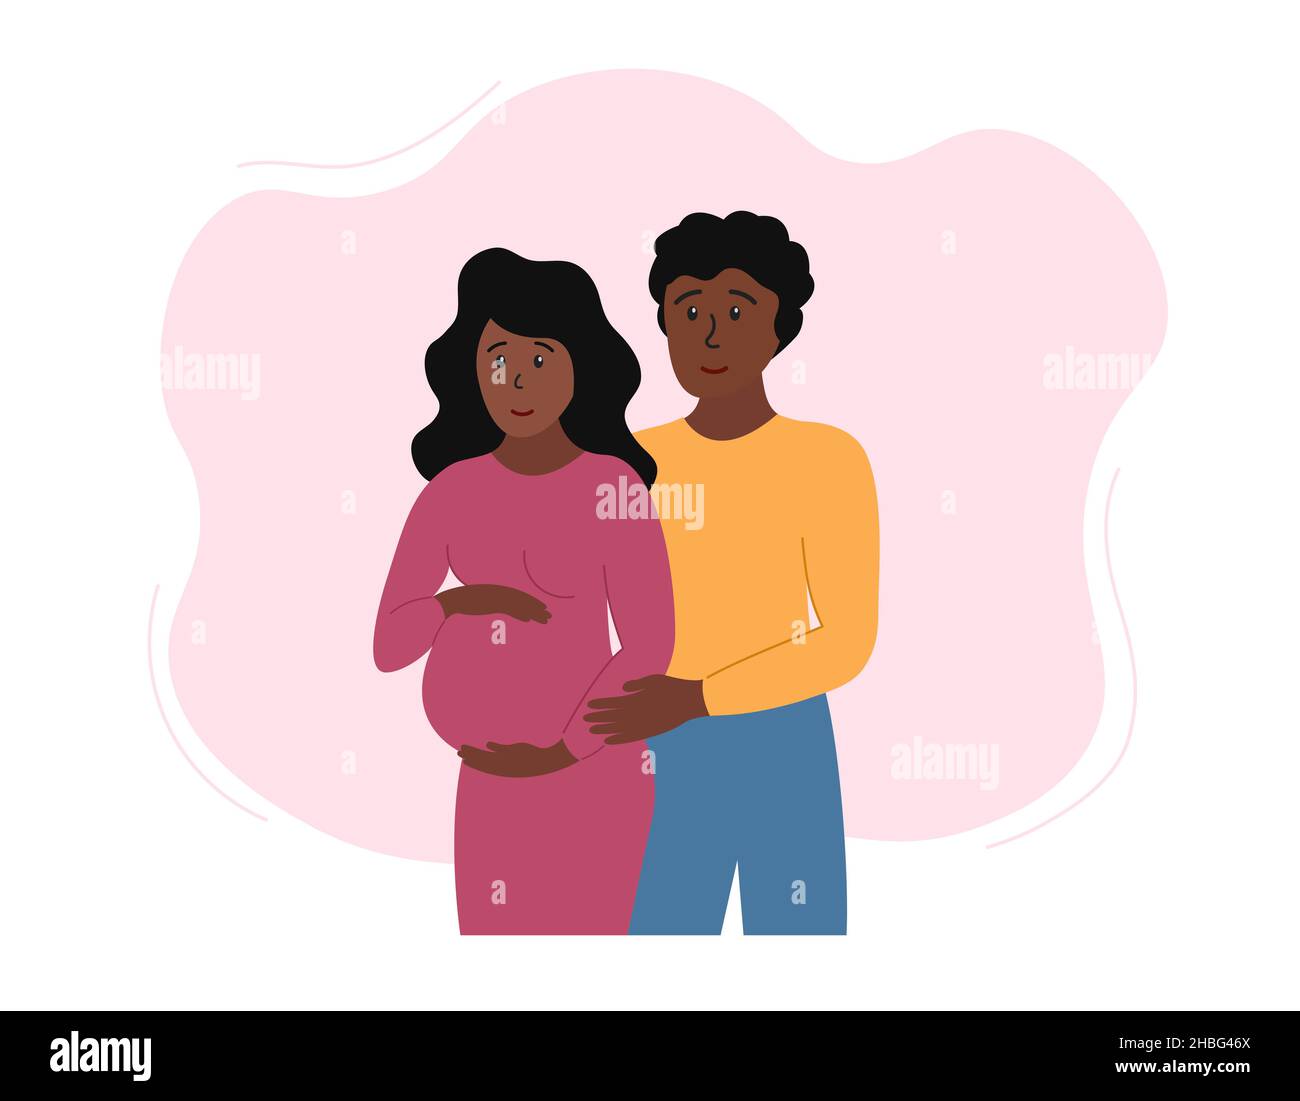 Pregnant couple. Happy married african american pregnant woman and hugging her man. Expectant mom and dad couple. Vector flat illustration. Stock Vector